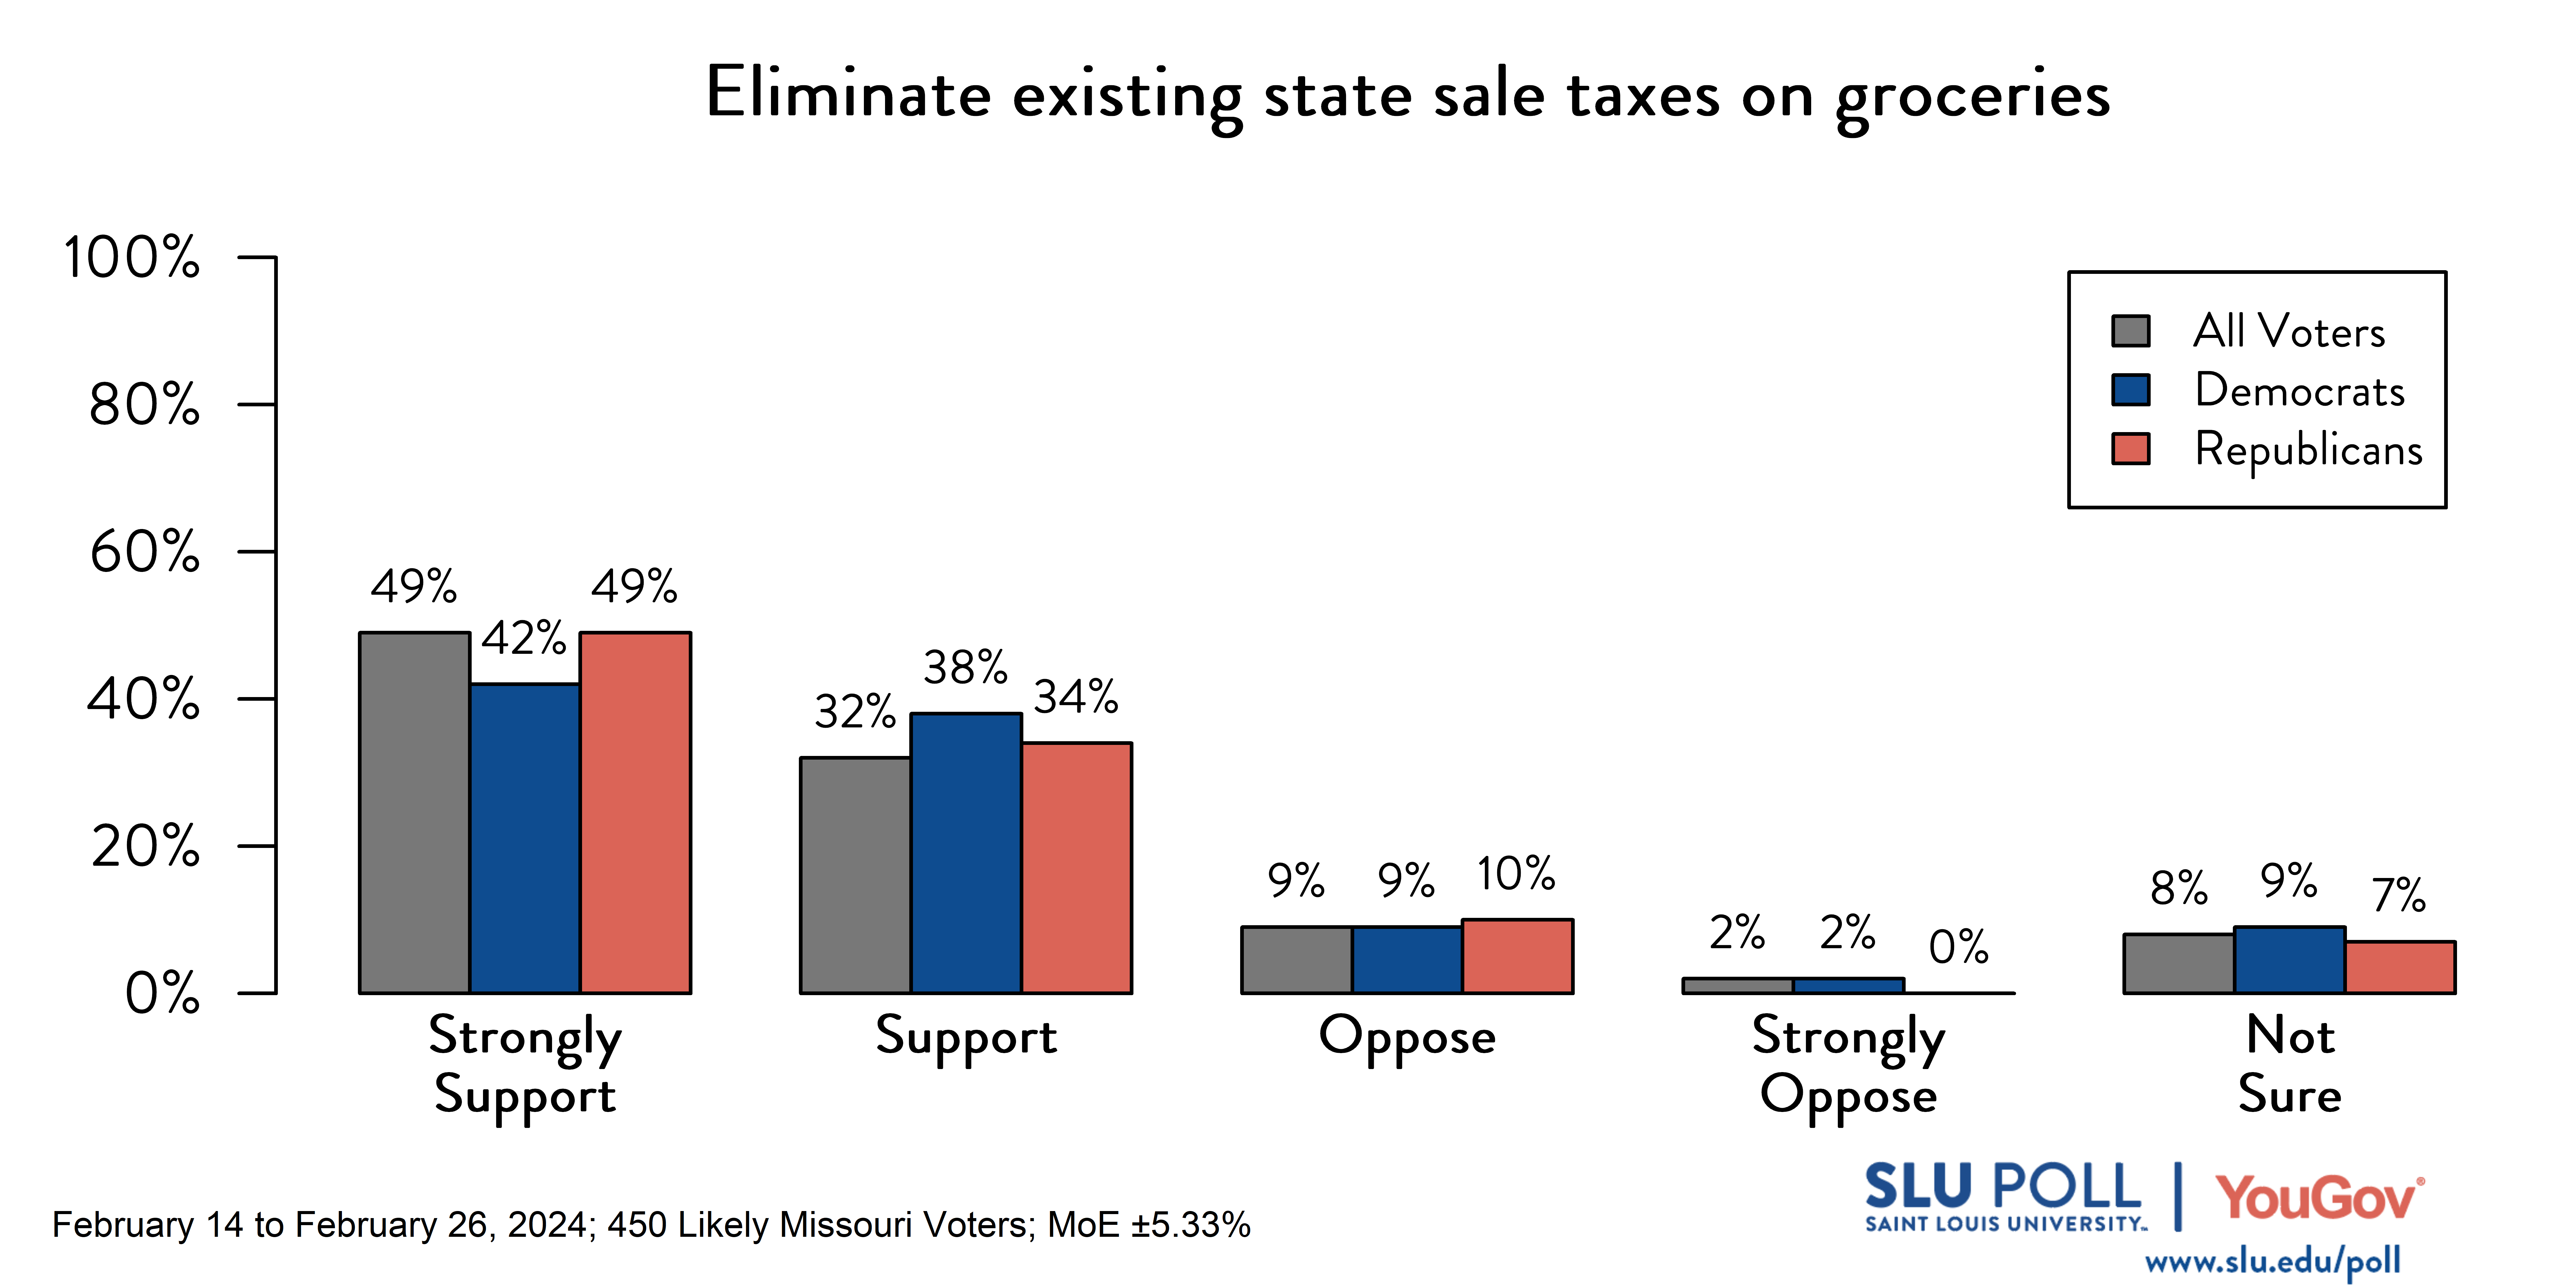 Likely voters' responses to 'Do you support the following policies…Eliminate existing state sale taxes on groceries?': 49% Strongly support, 32% Support, 9% Oppose, 2% Strongly oppose, and 8% Not sure. Democratic voters' responses: ' 42% Strongly support, 38% Support, 9% Oppose, 2% Strongly oppose, and 9% Not sure. Republican voters' responses:  49% Strongly support, 34% Support, 10% Oppose, 0% Strongly oppose, and 7% Not sure.